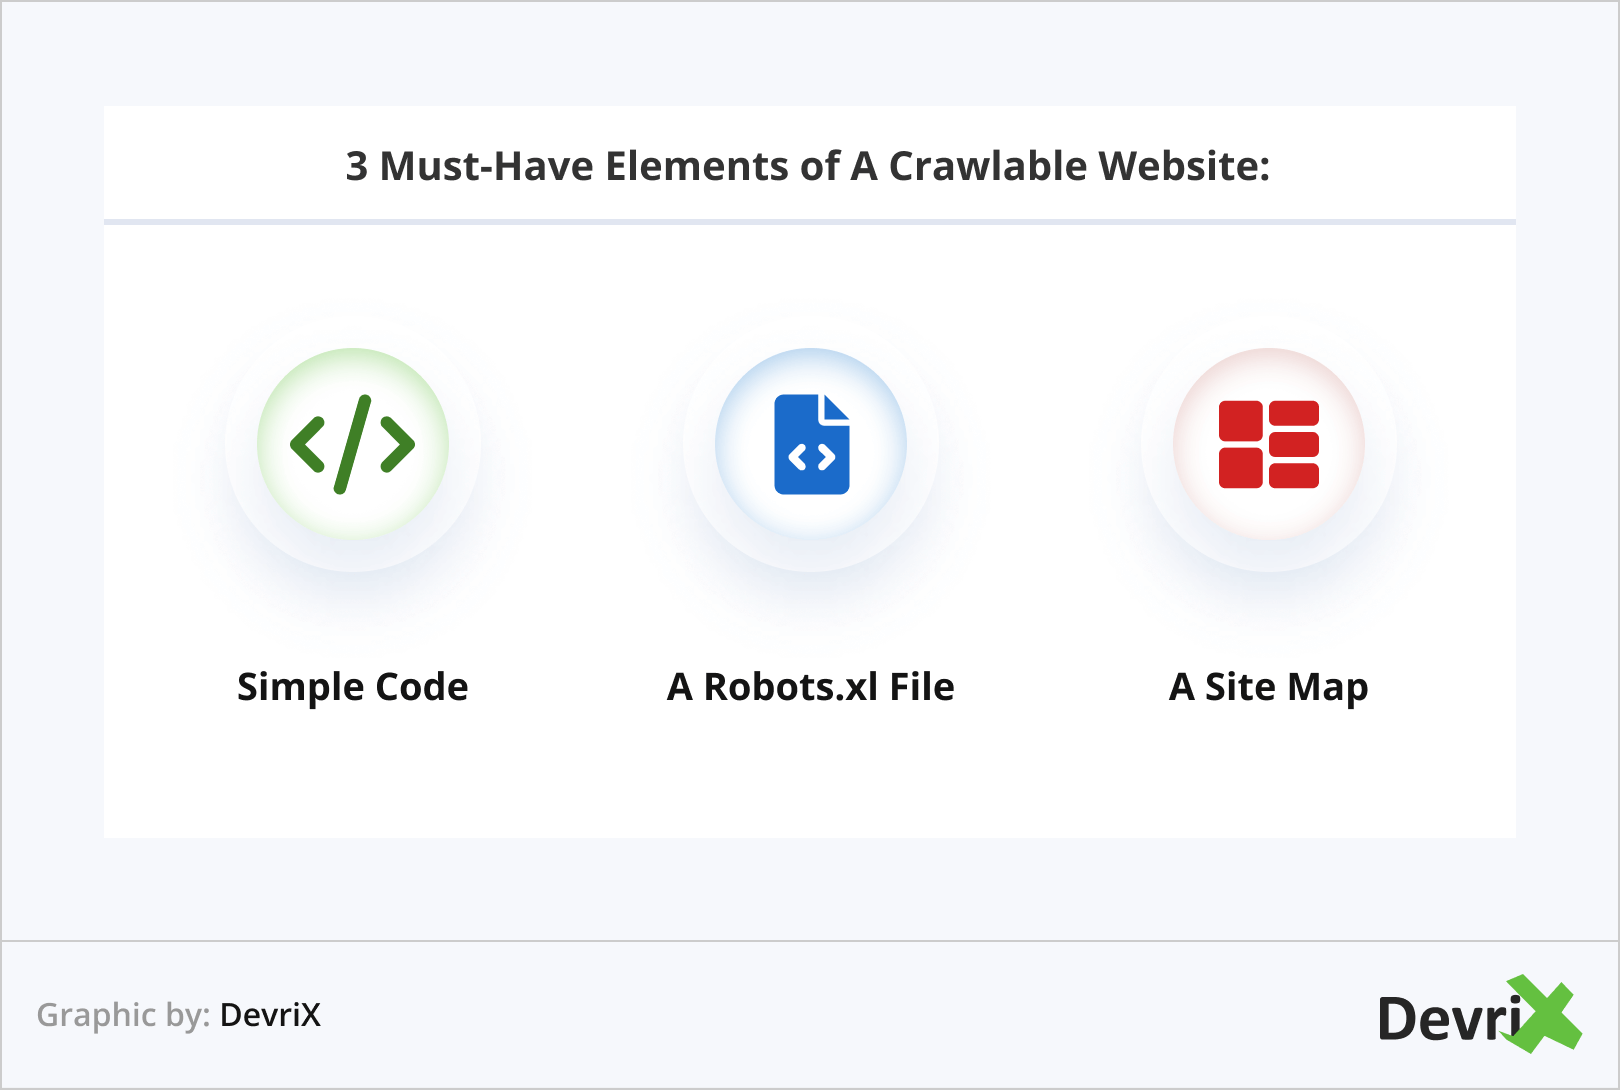 3 Must-Have Elements of A Crawlable Website